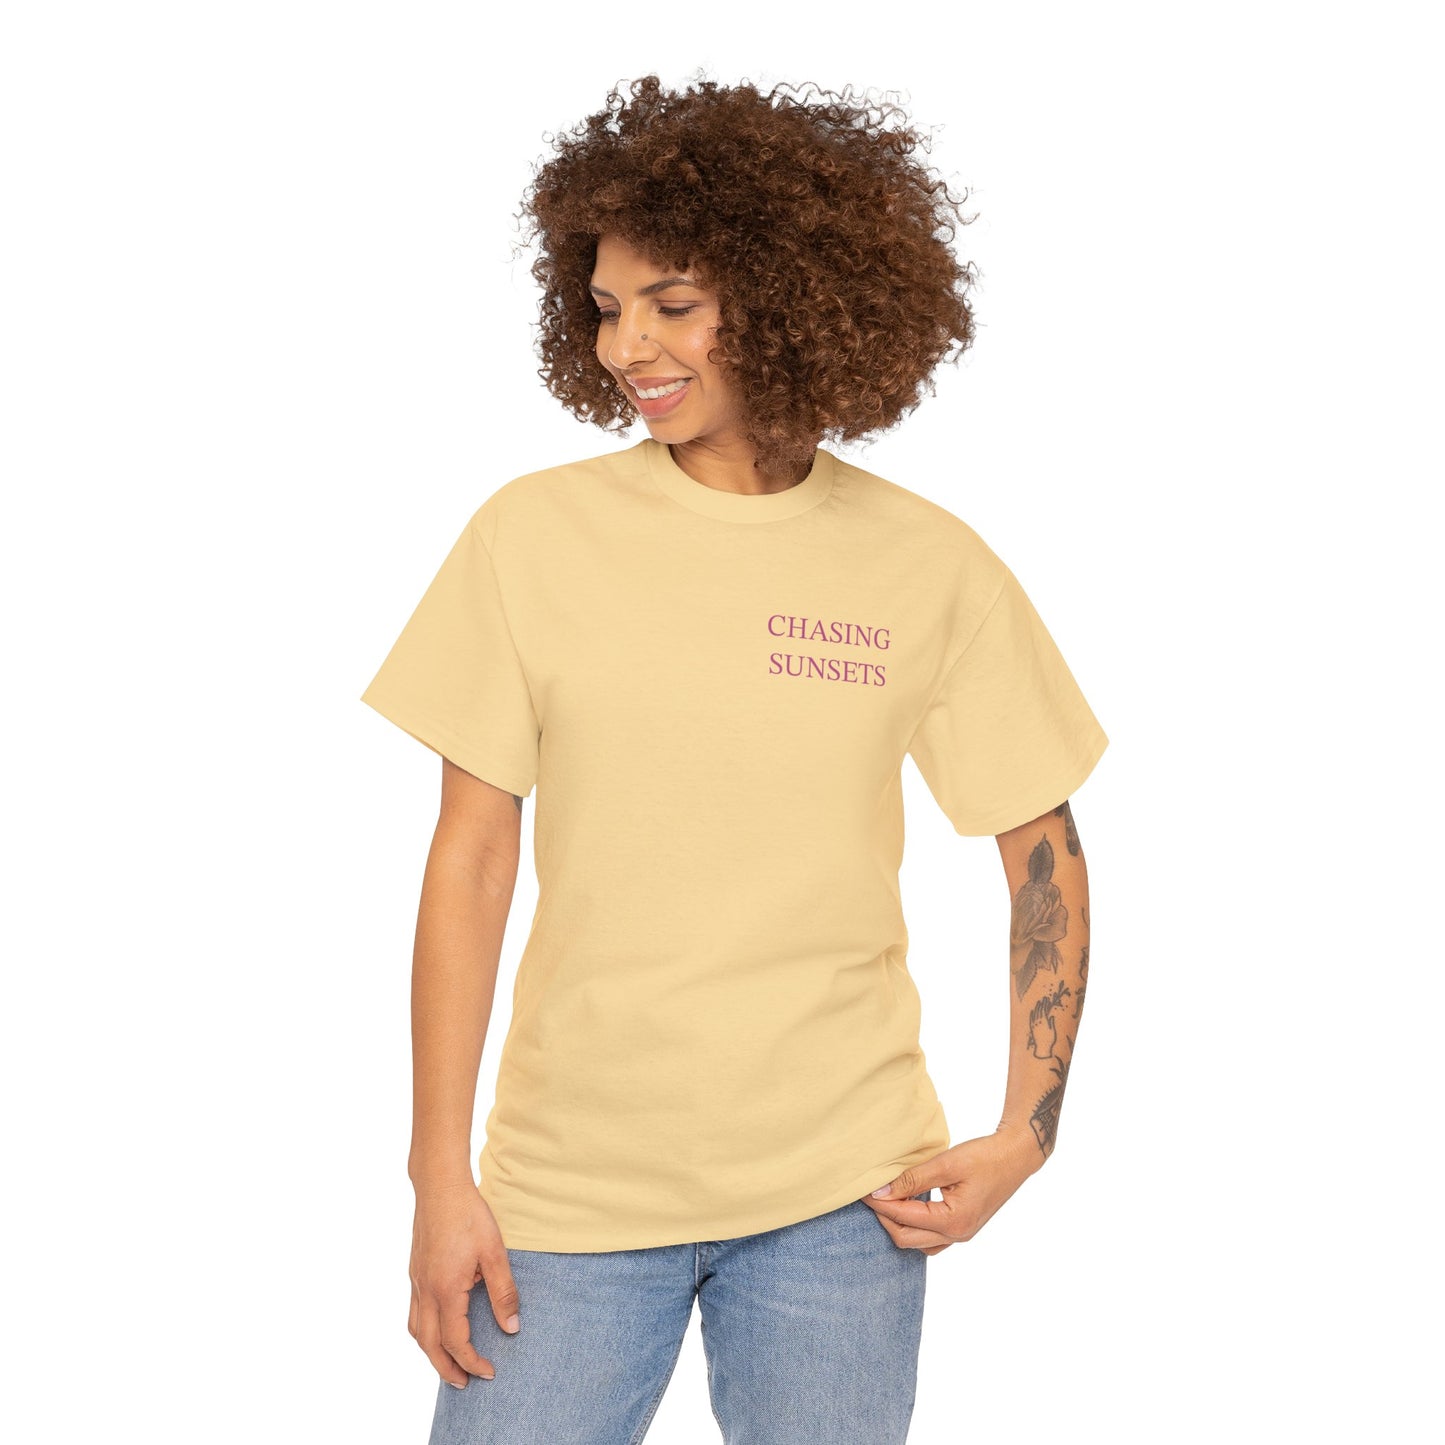 Chasing Sunsets Cotton Tee